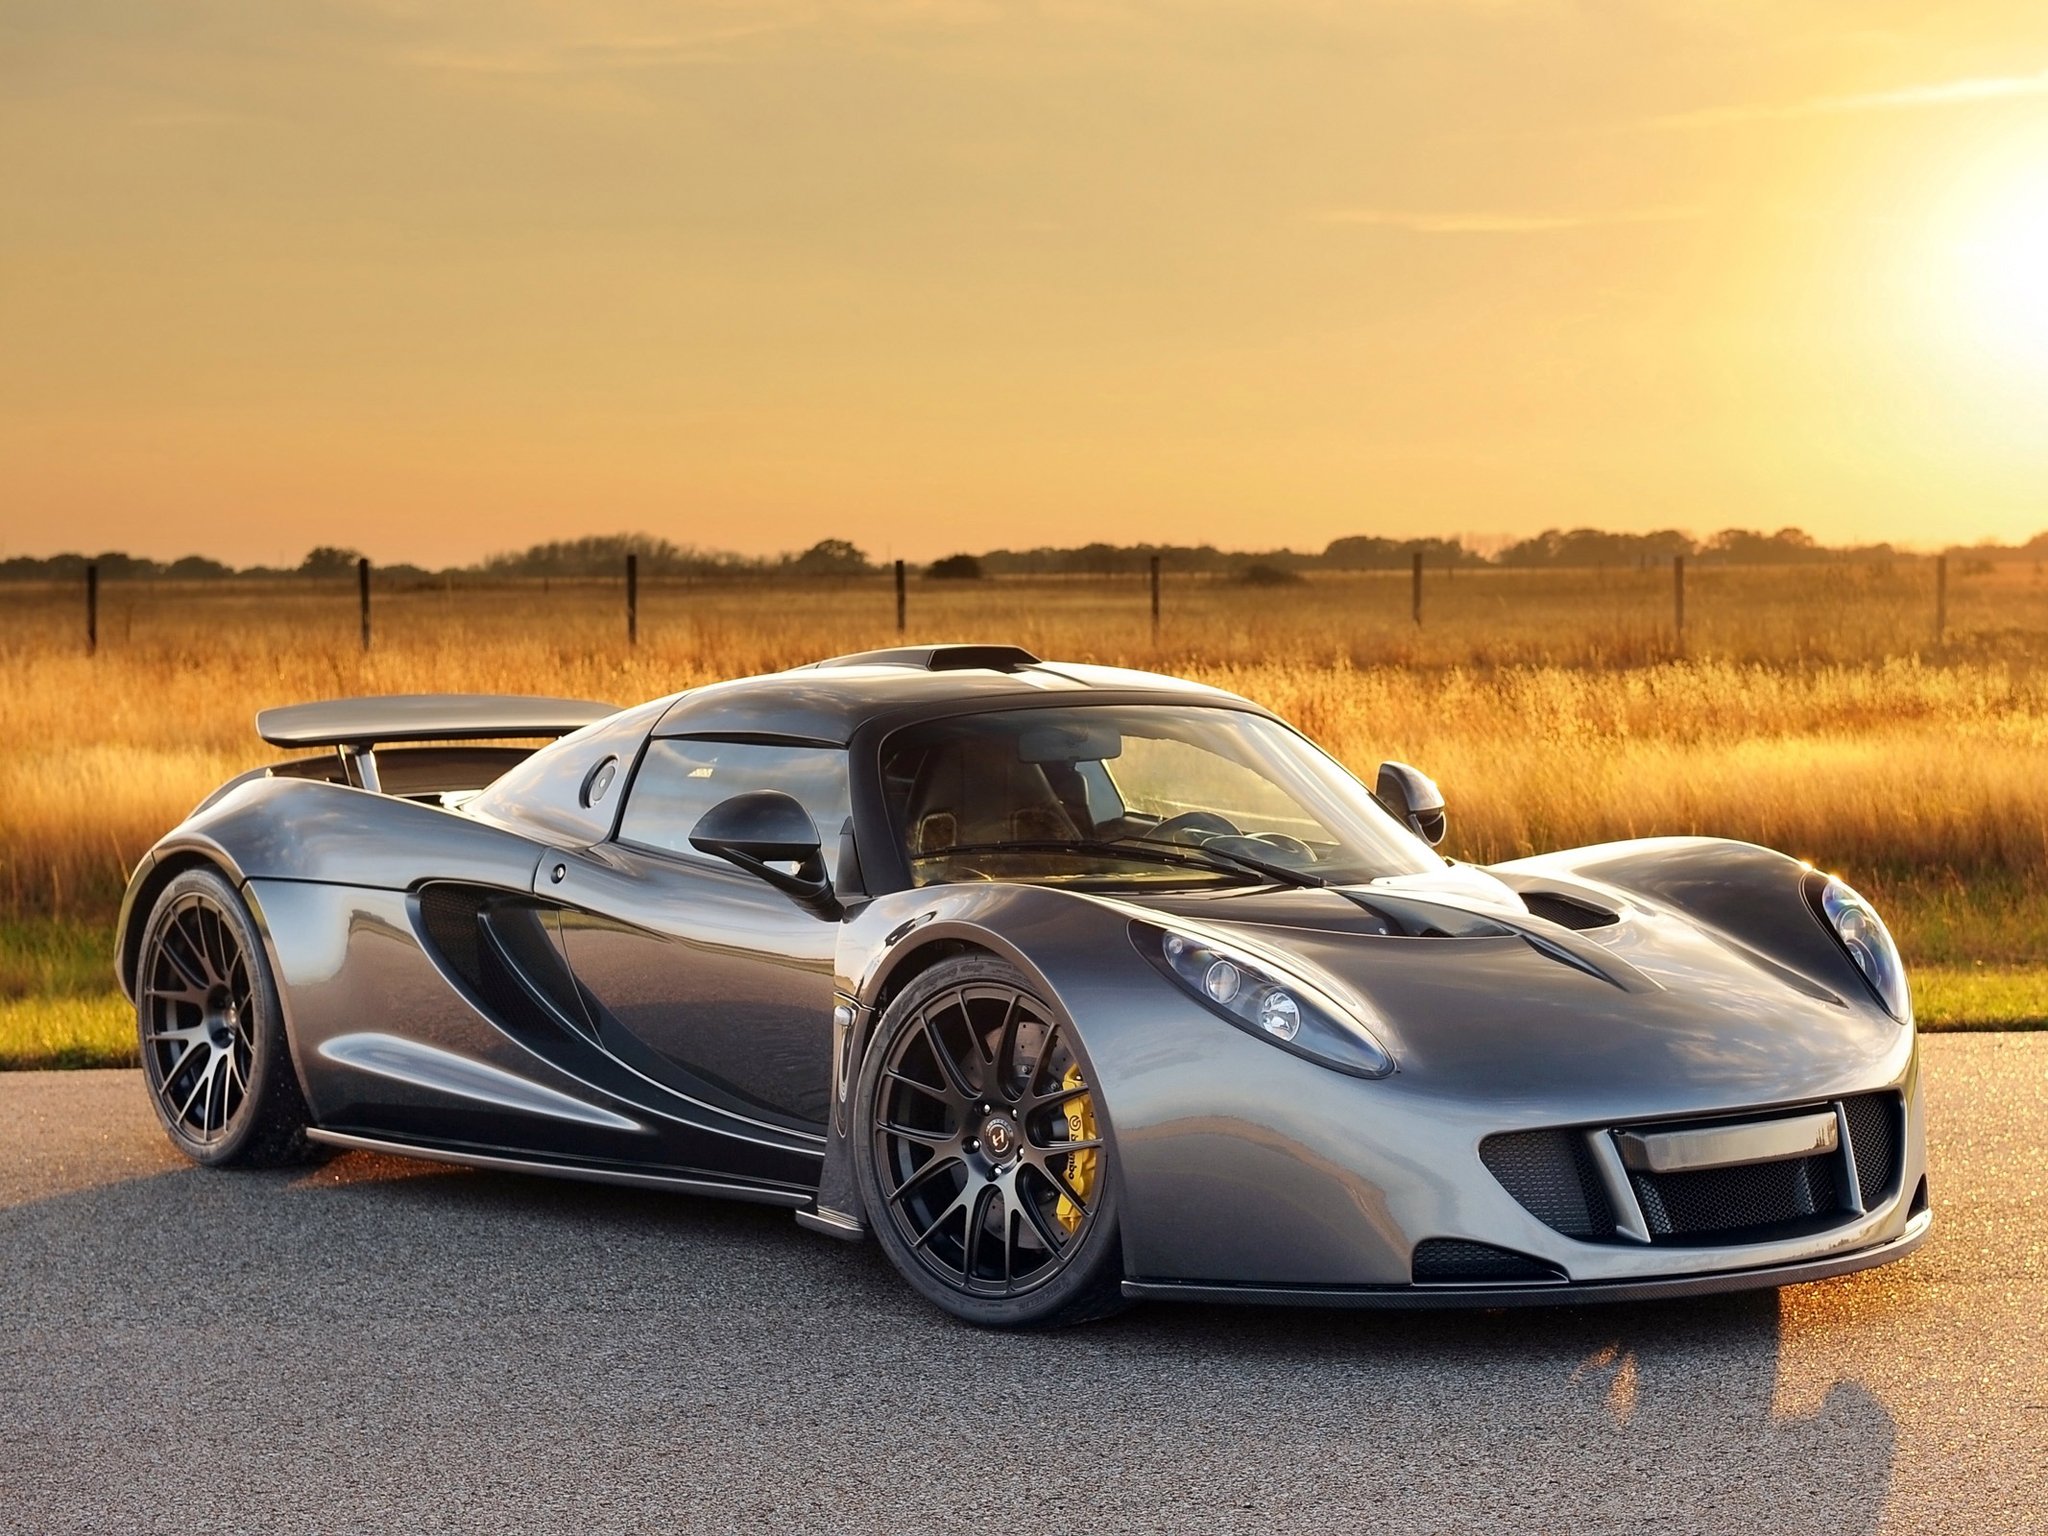 Nfs Rivals Hennessey Venom Gt Wallpaper - Nice Looking Cars In The World - HD Wallpaper 